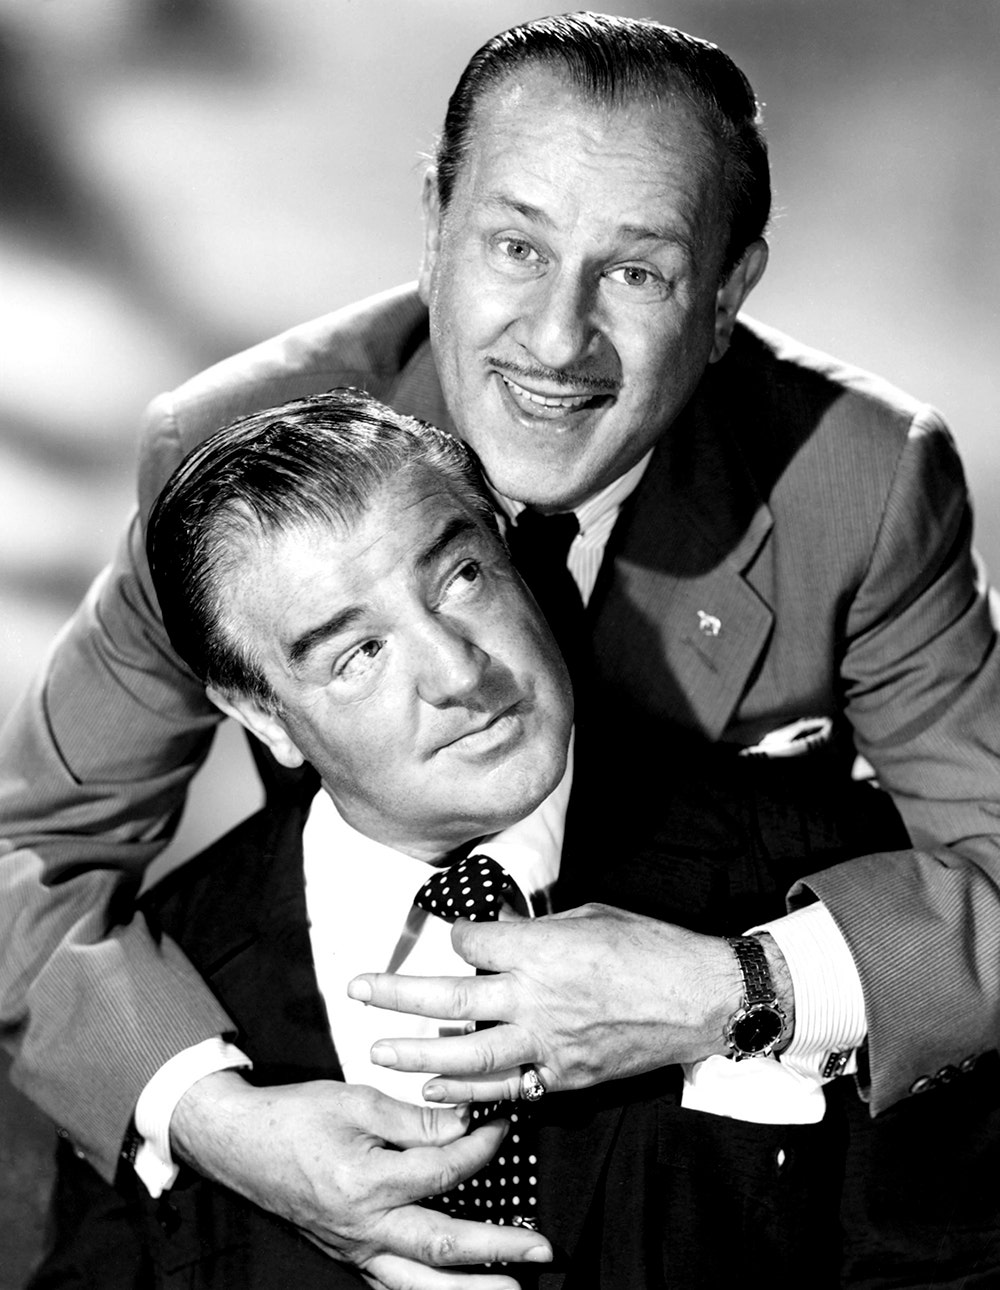 Bud Abbott in a suit embracing Lou Costello who is also in a suit and looking above at Lou Costello